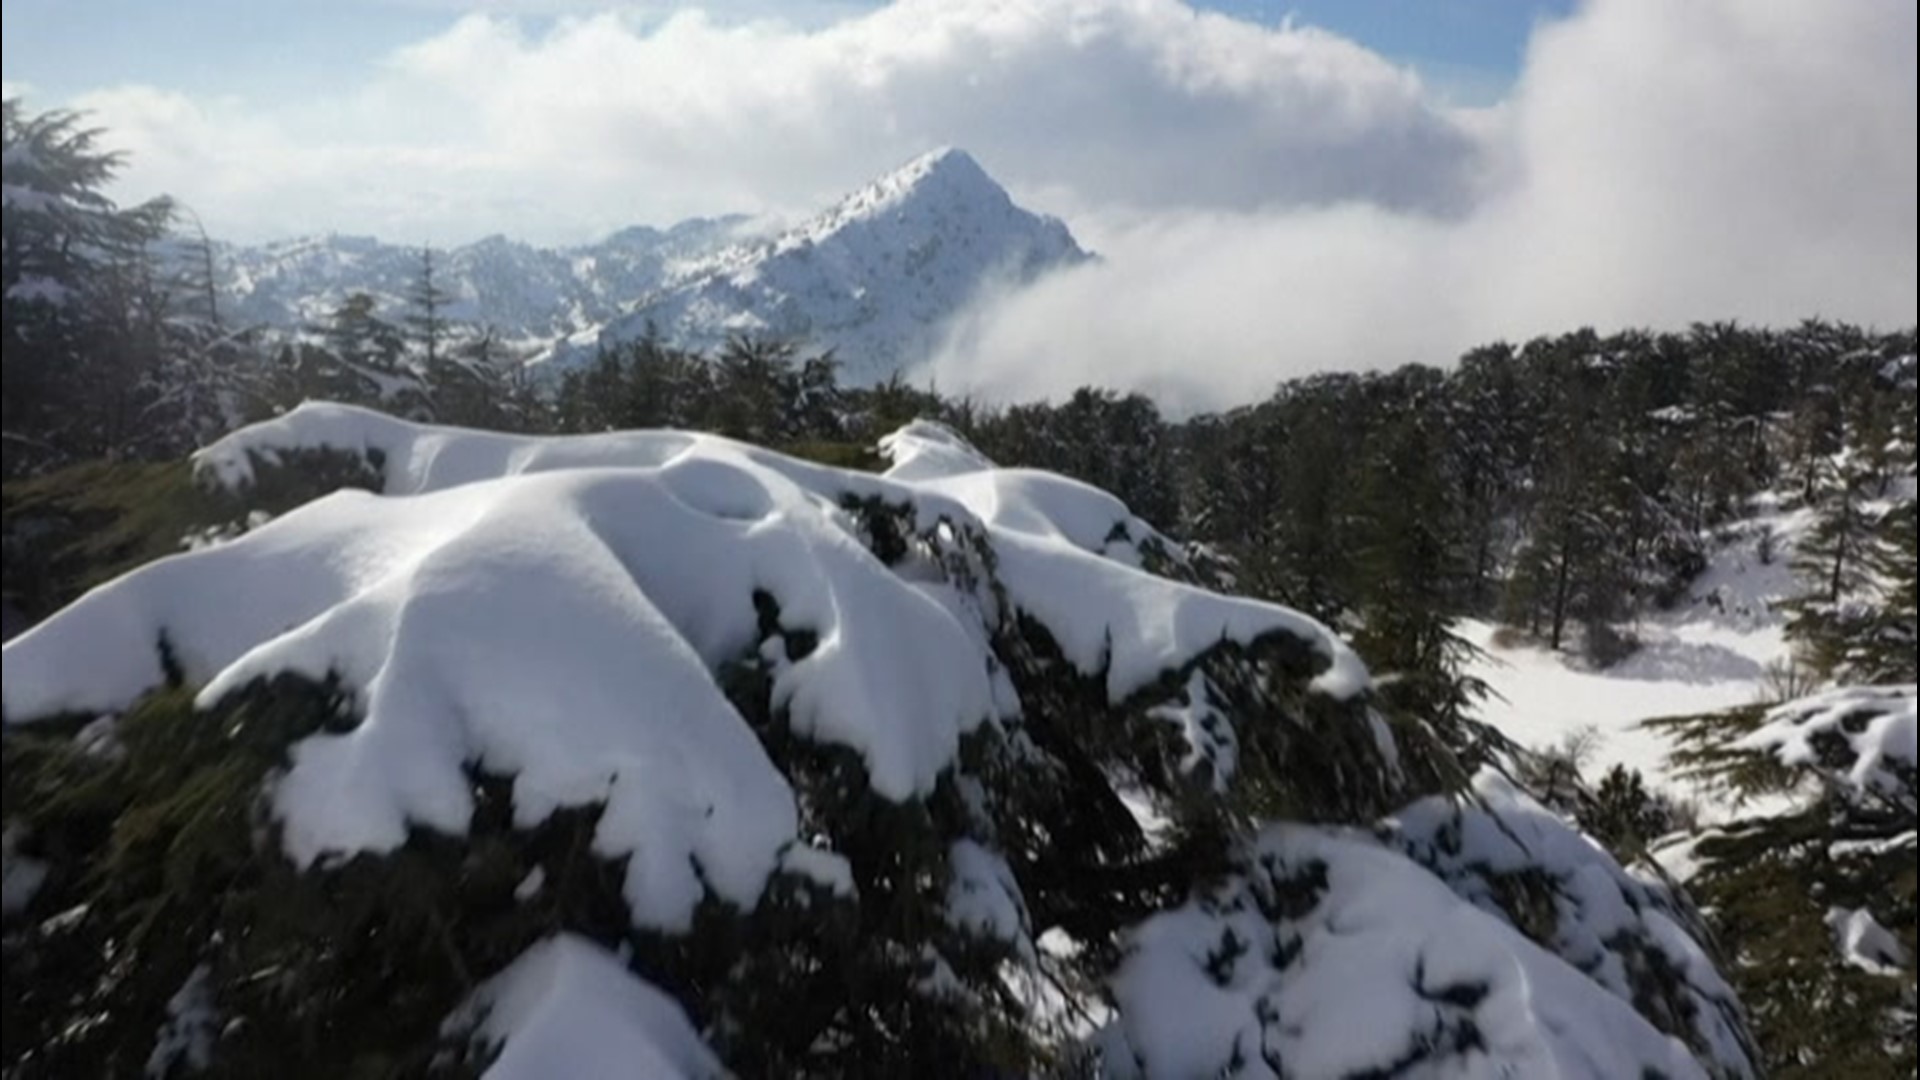 Lebanon's iconic cedar trees blanketed with snow